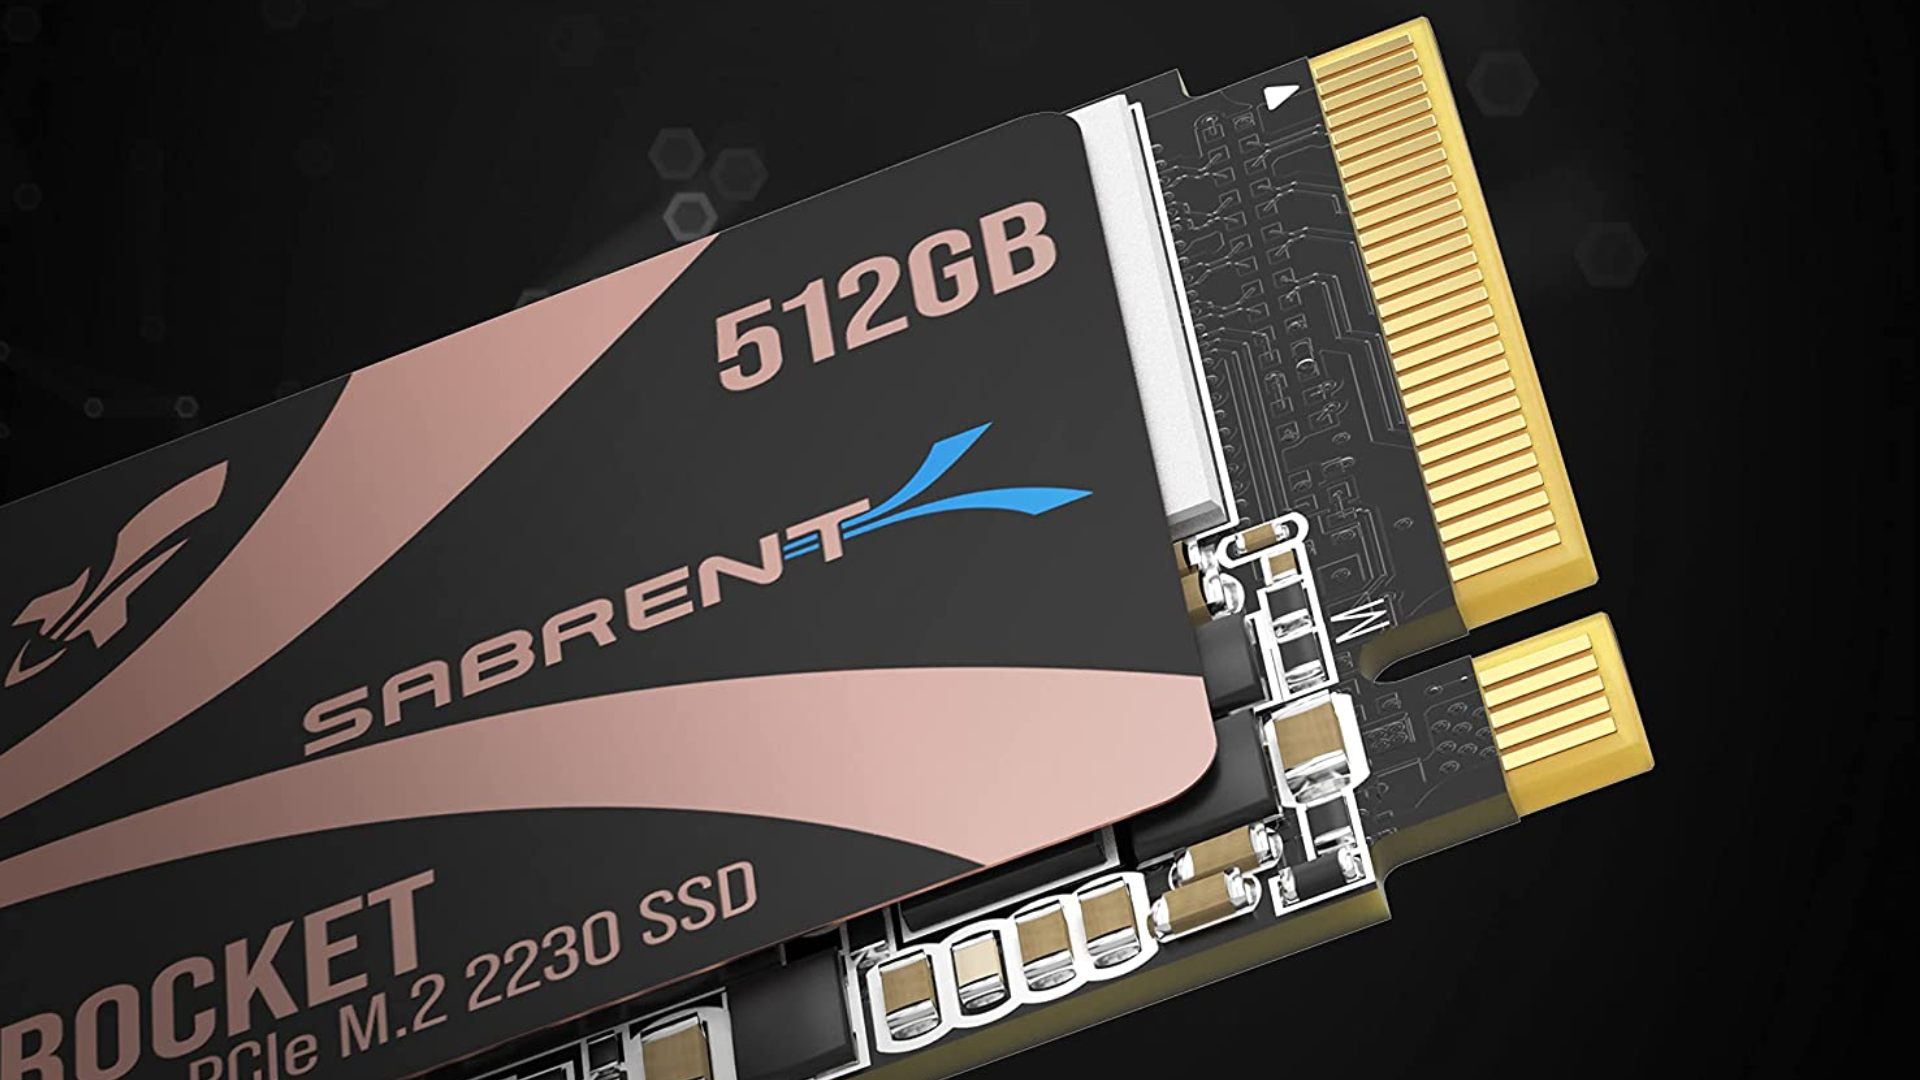 Sabrent may have just dropped the Steam Deck NVMe SSD of my dreams